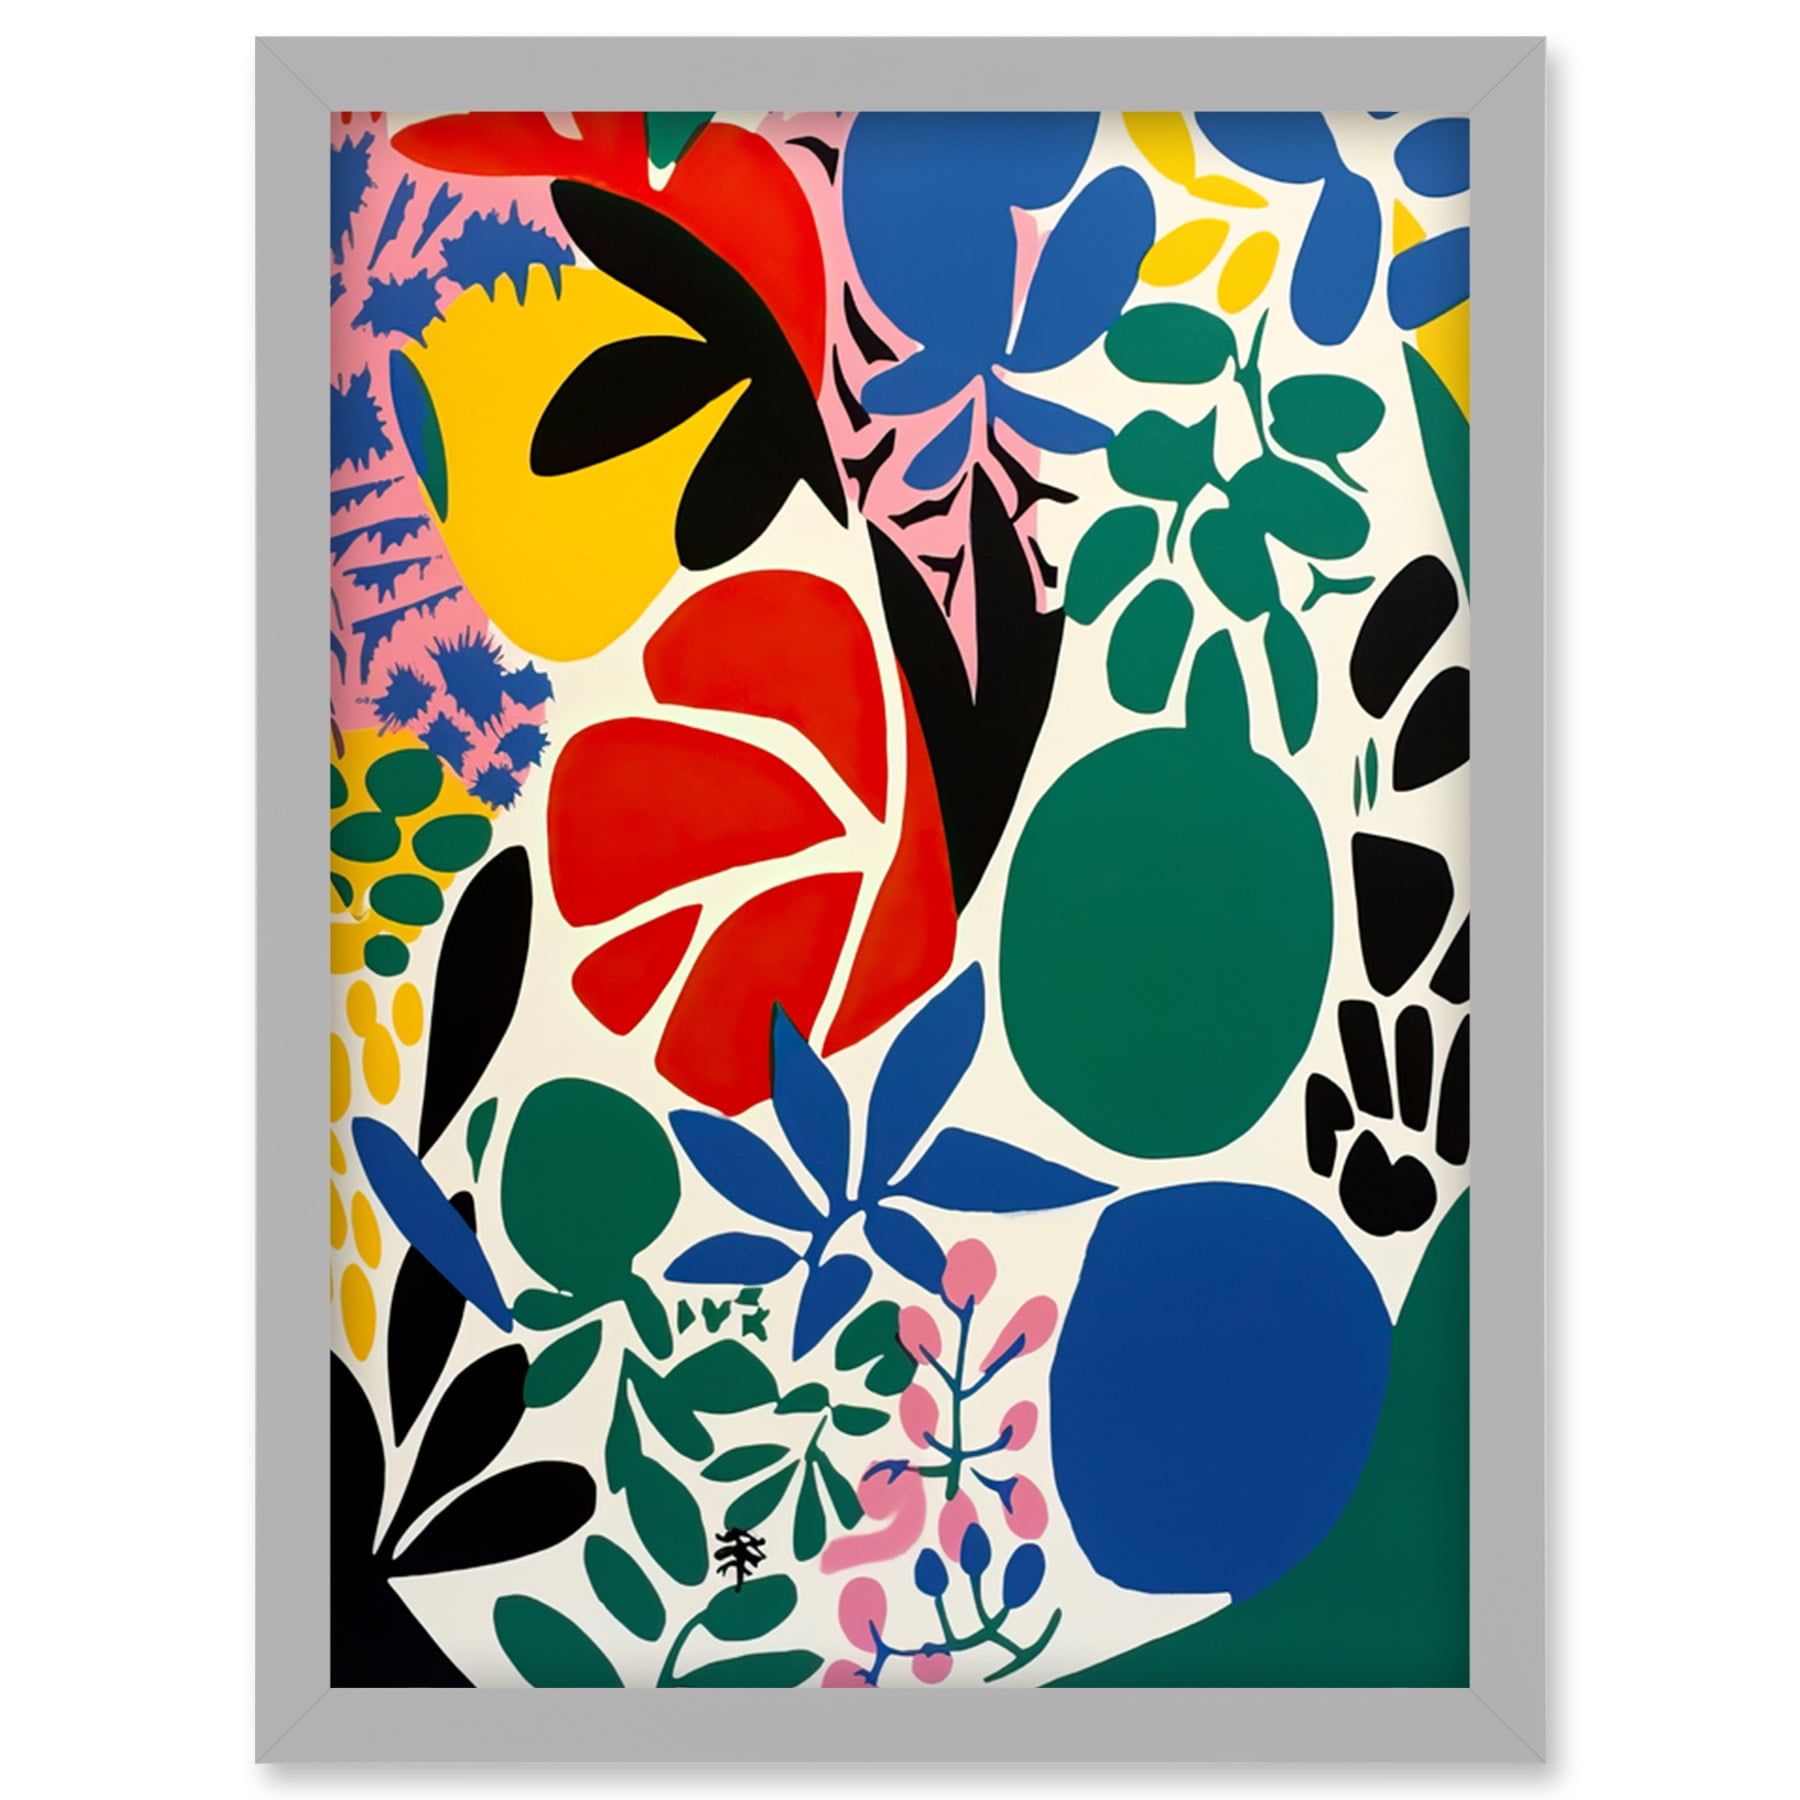 BIG CANVAS ART PAINTING WITH KIDS INSPIRED BY MATISSE